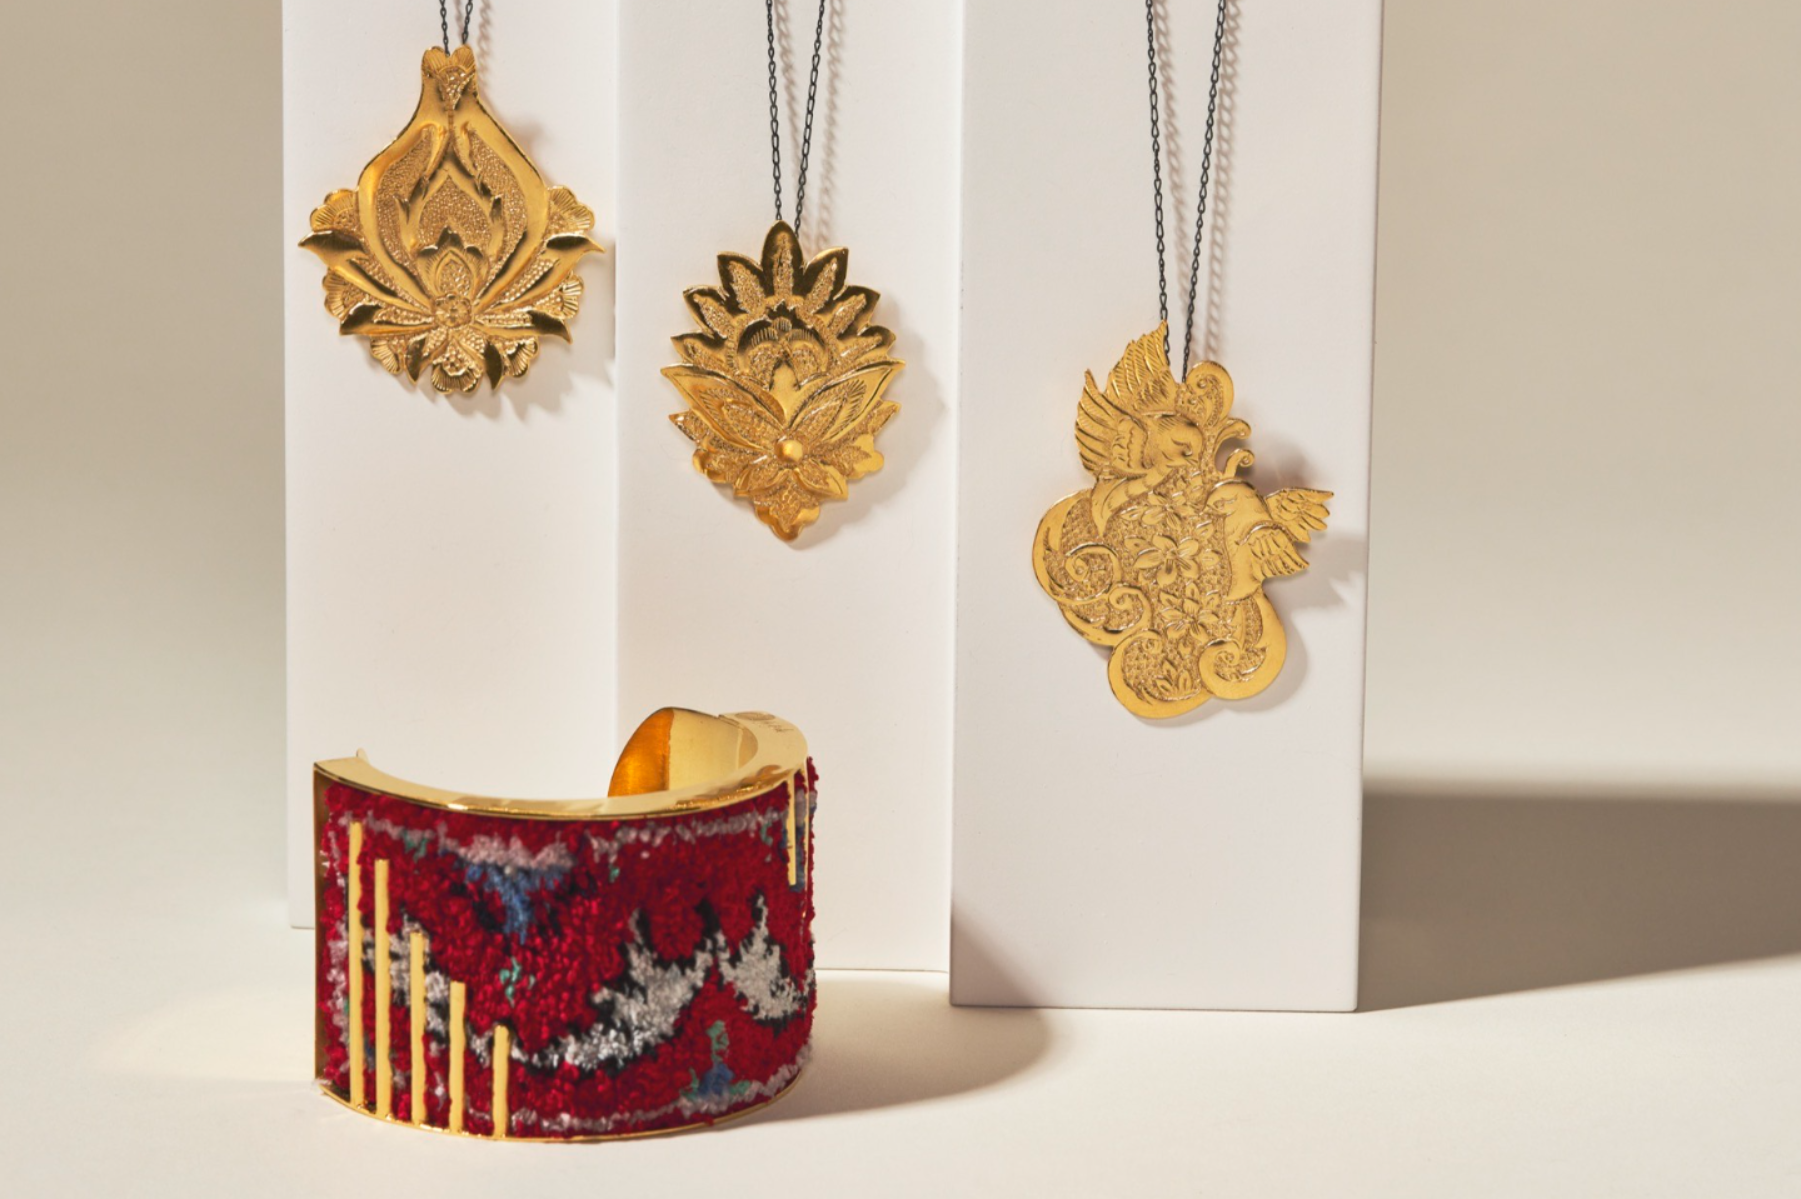 Silk Road - A Golden Bangle Woven with silk Persian carpet next to Hand-chased Golden Pendants Inspired by the Enchanting Patterns of Persian Carpets, a Trio of Timeless 